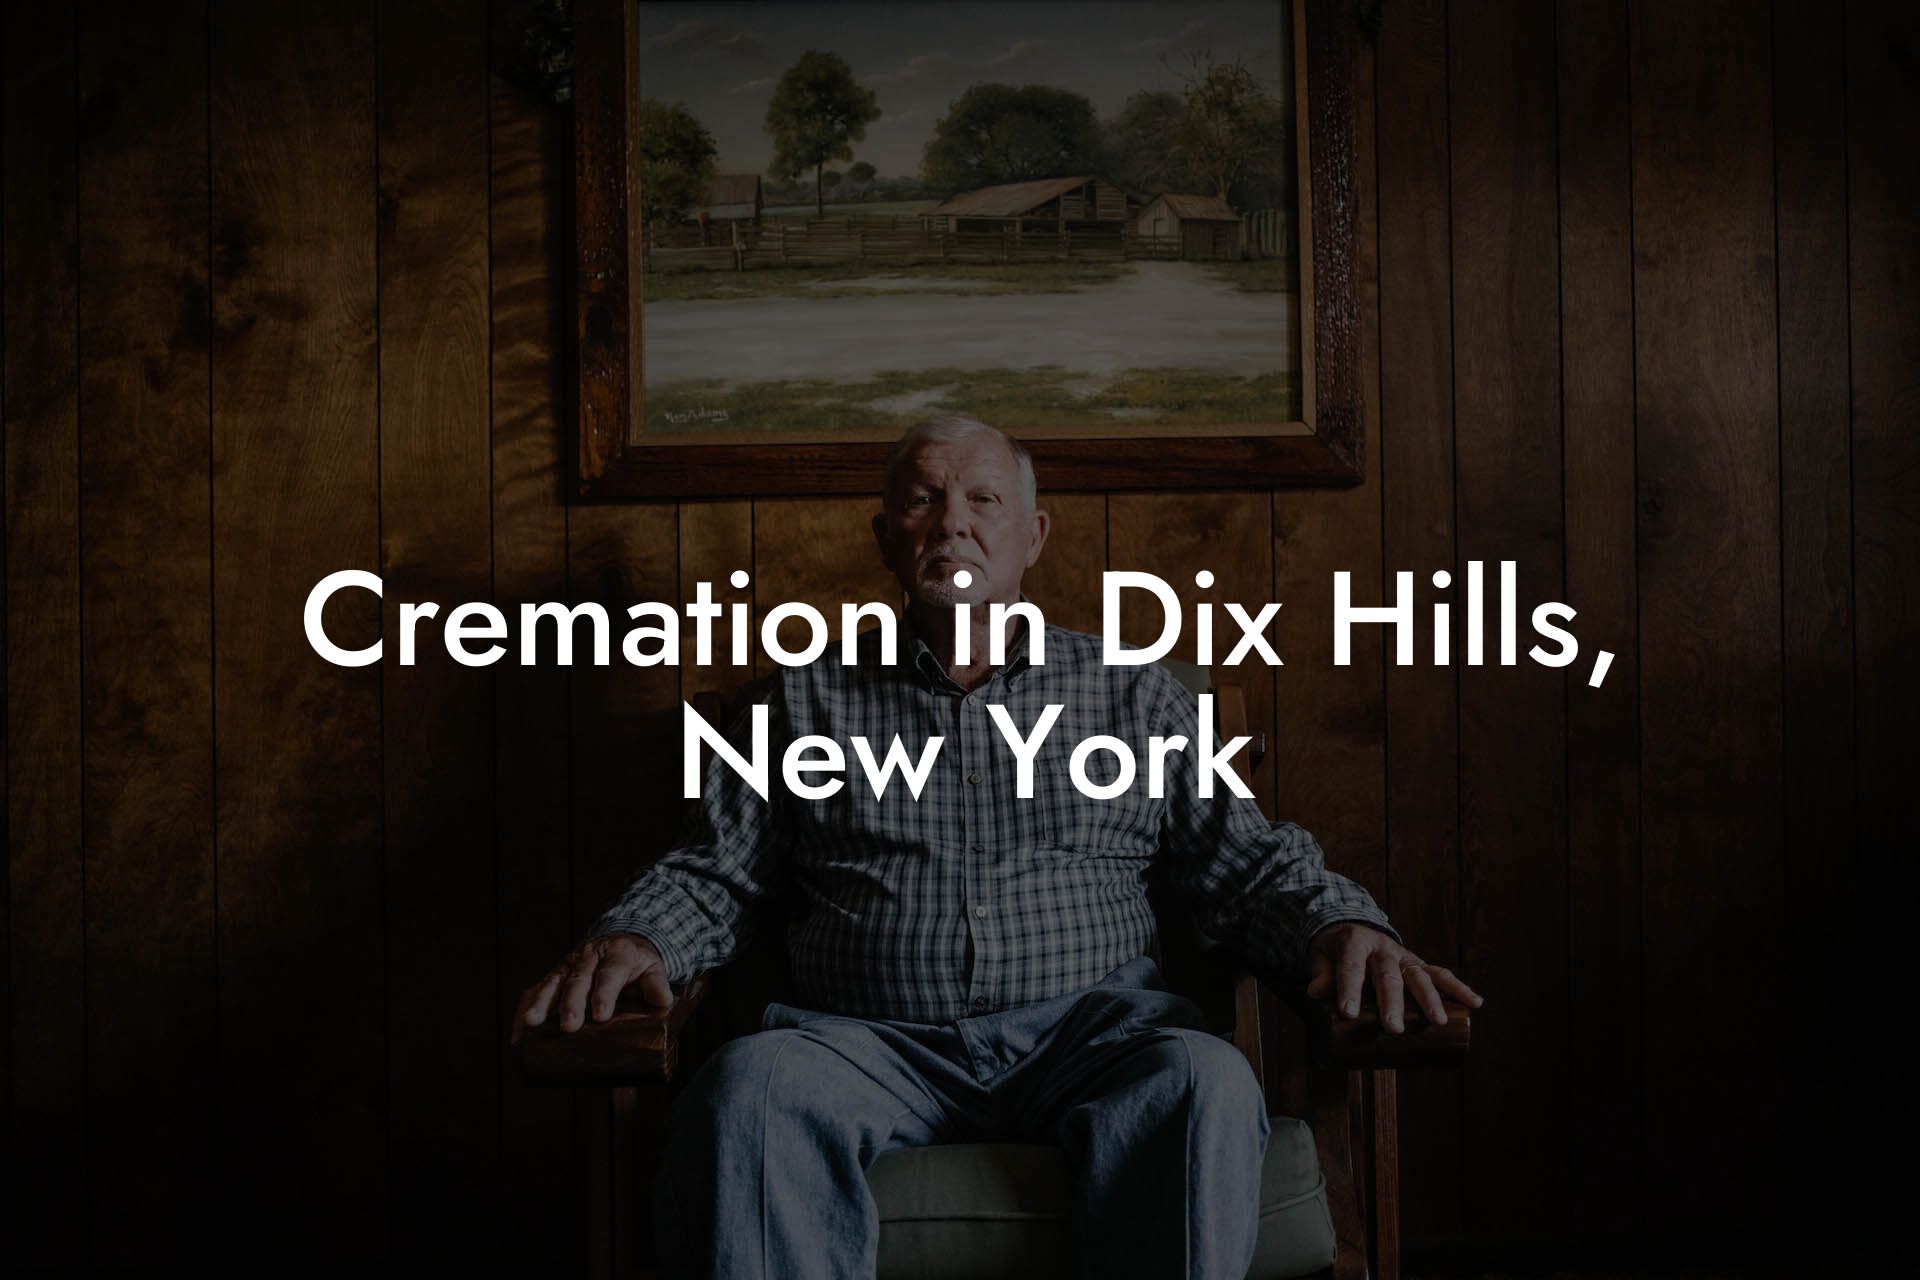 Cremation in Dix Hills, New York